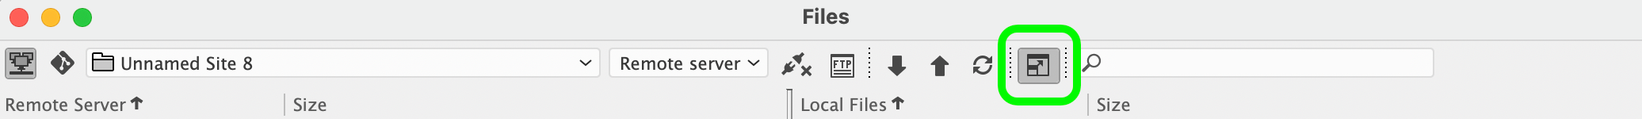 Collapse icon in files panel